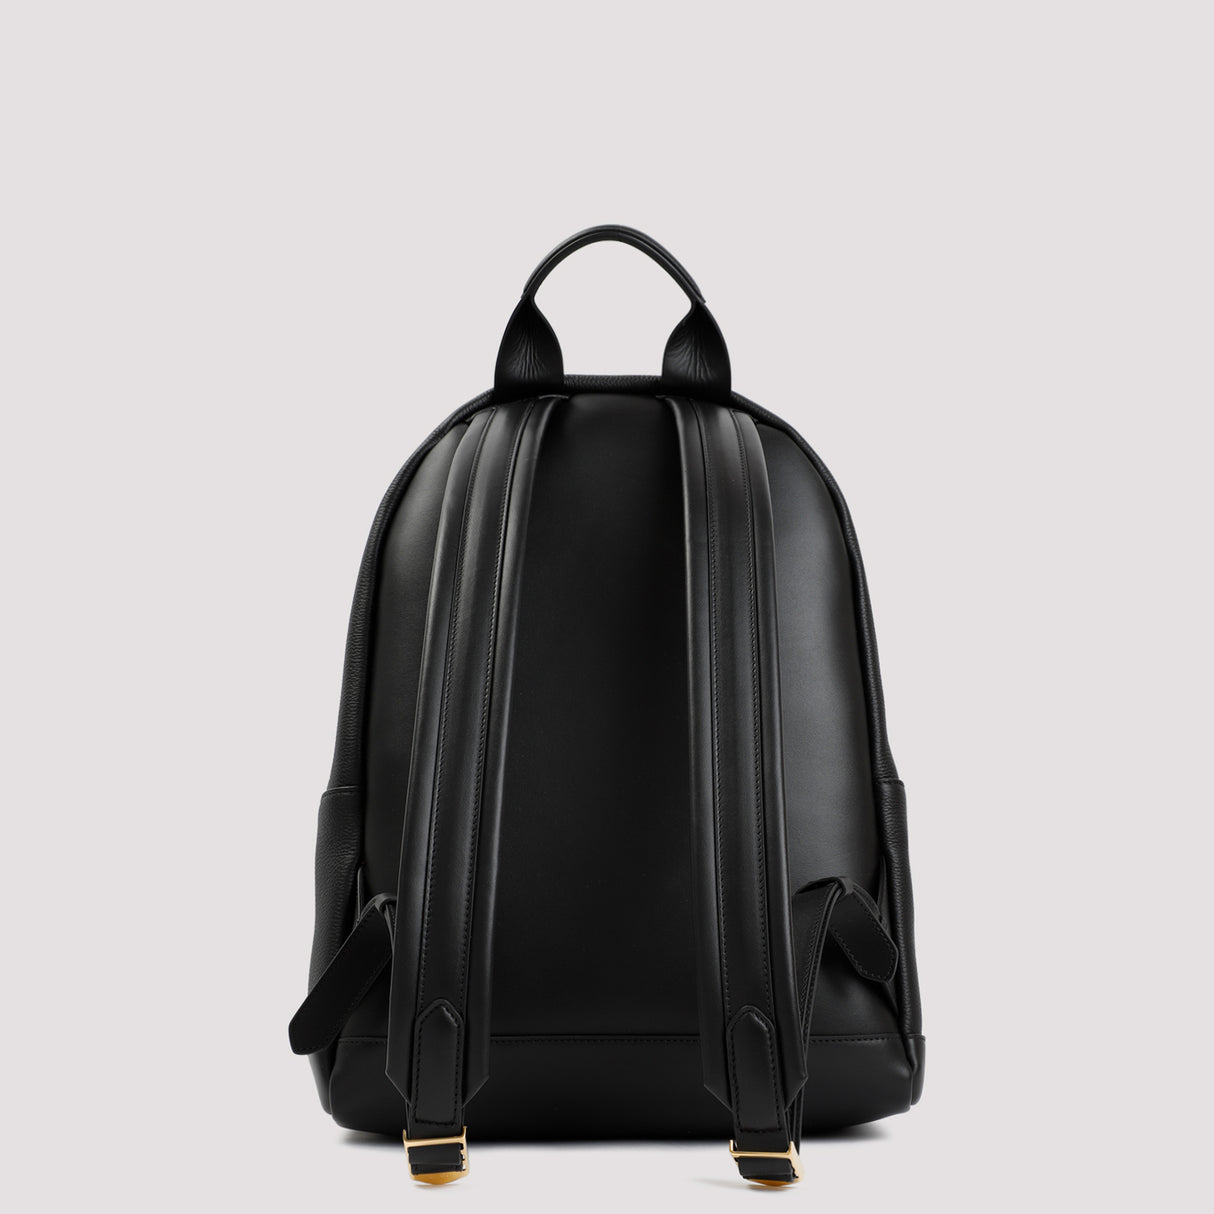 TOM FORD 100% Leather LEATHER BACKPACK